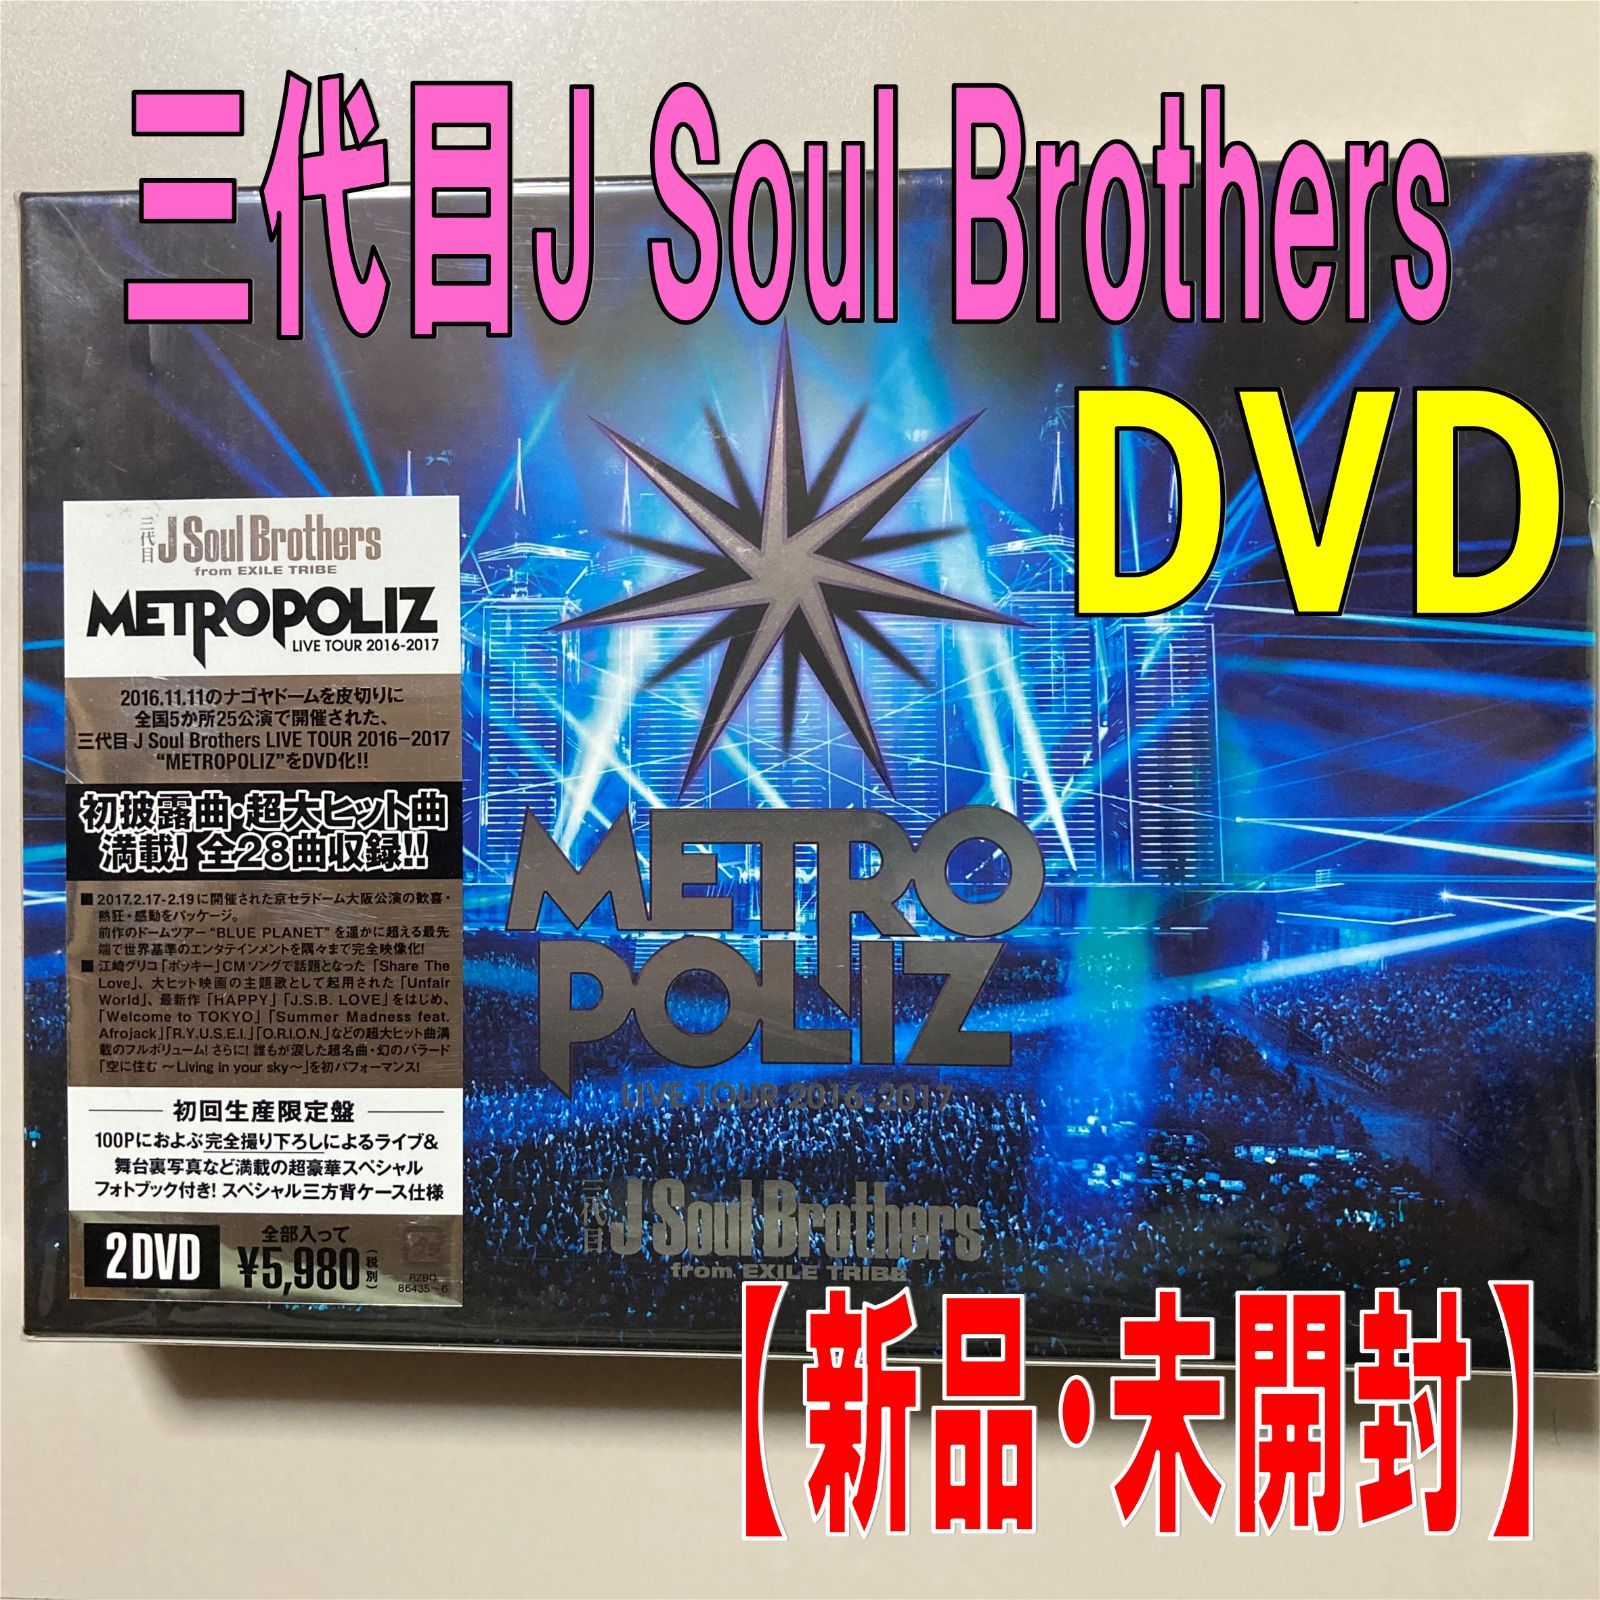 【DVD】三代目J Soul Brothers from EXILE TRIBE【METROPOLIZ LIVE TOUR 2016-2017】　 初回生産限定盤　100Pのフォトブック付き！ 【新品　未開封】【匿名配送】1点限り　即購入OK